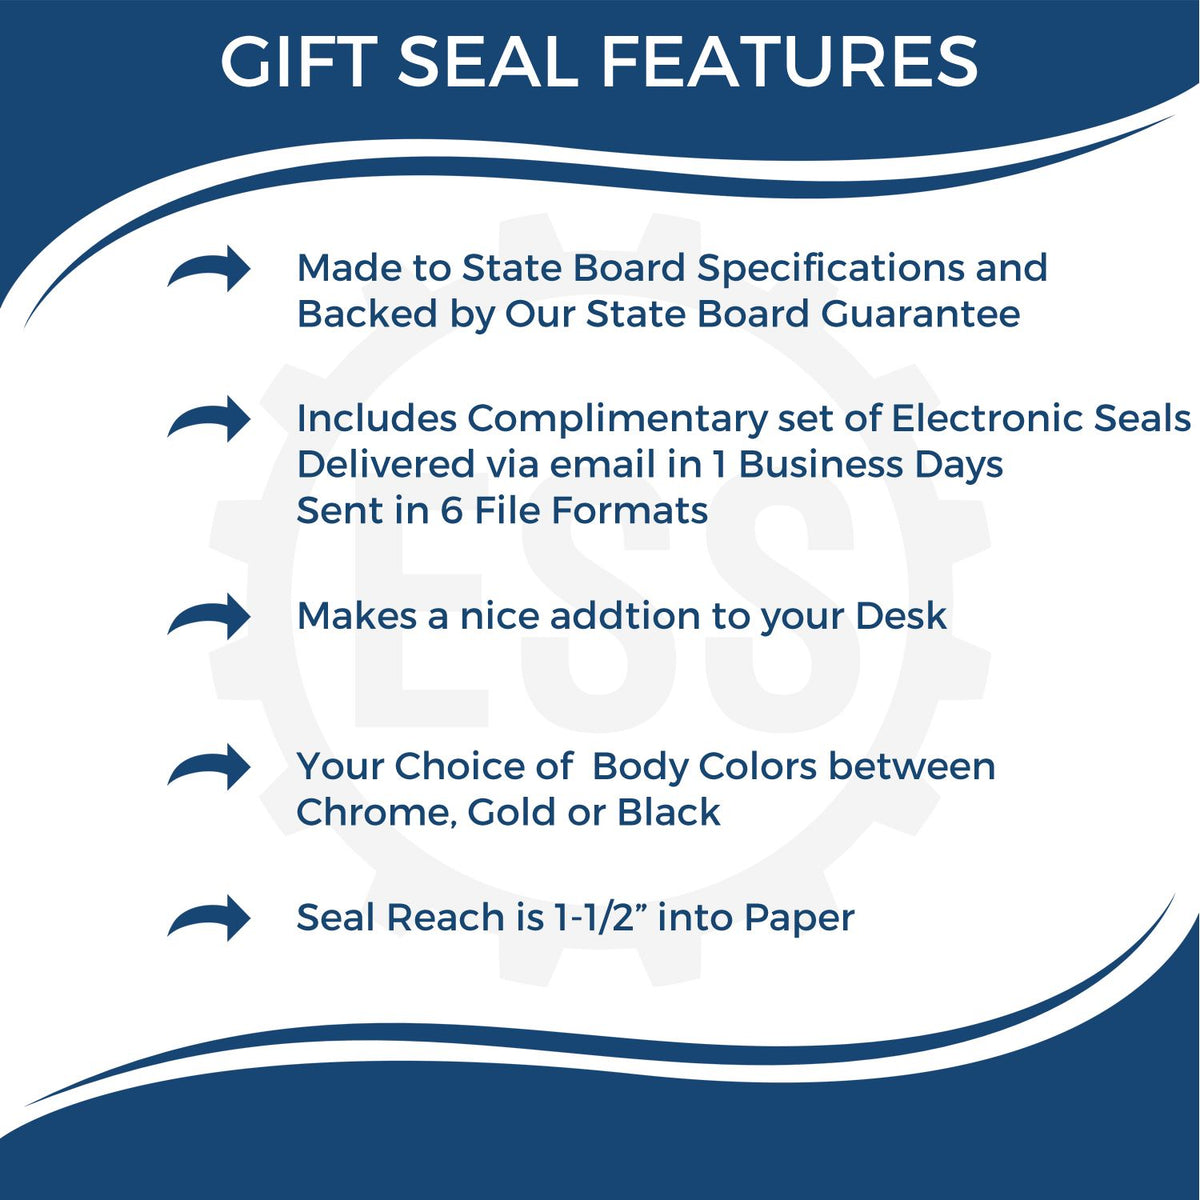 A picture of an infographic highlighting the selling points for the Gift Alaska Architect Seal